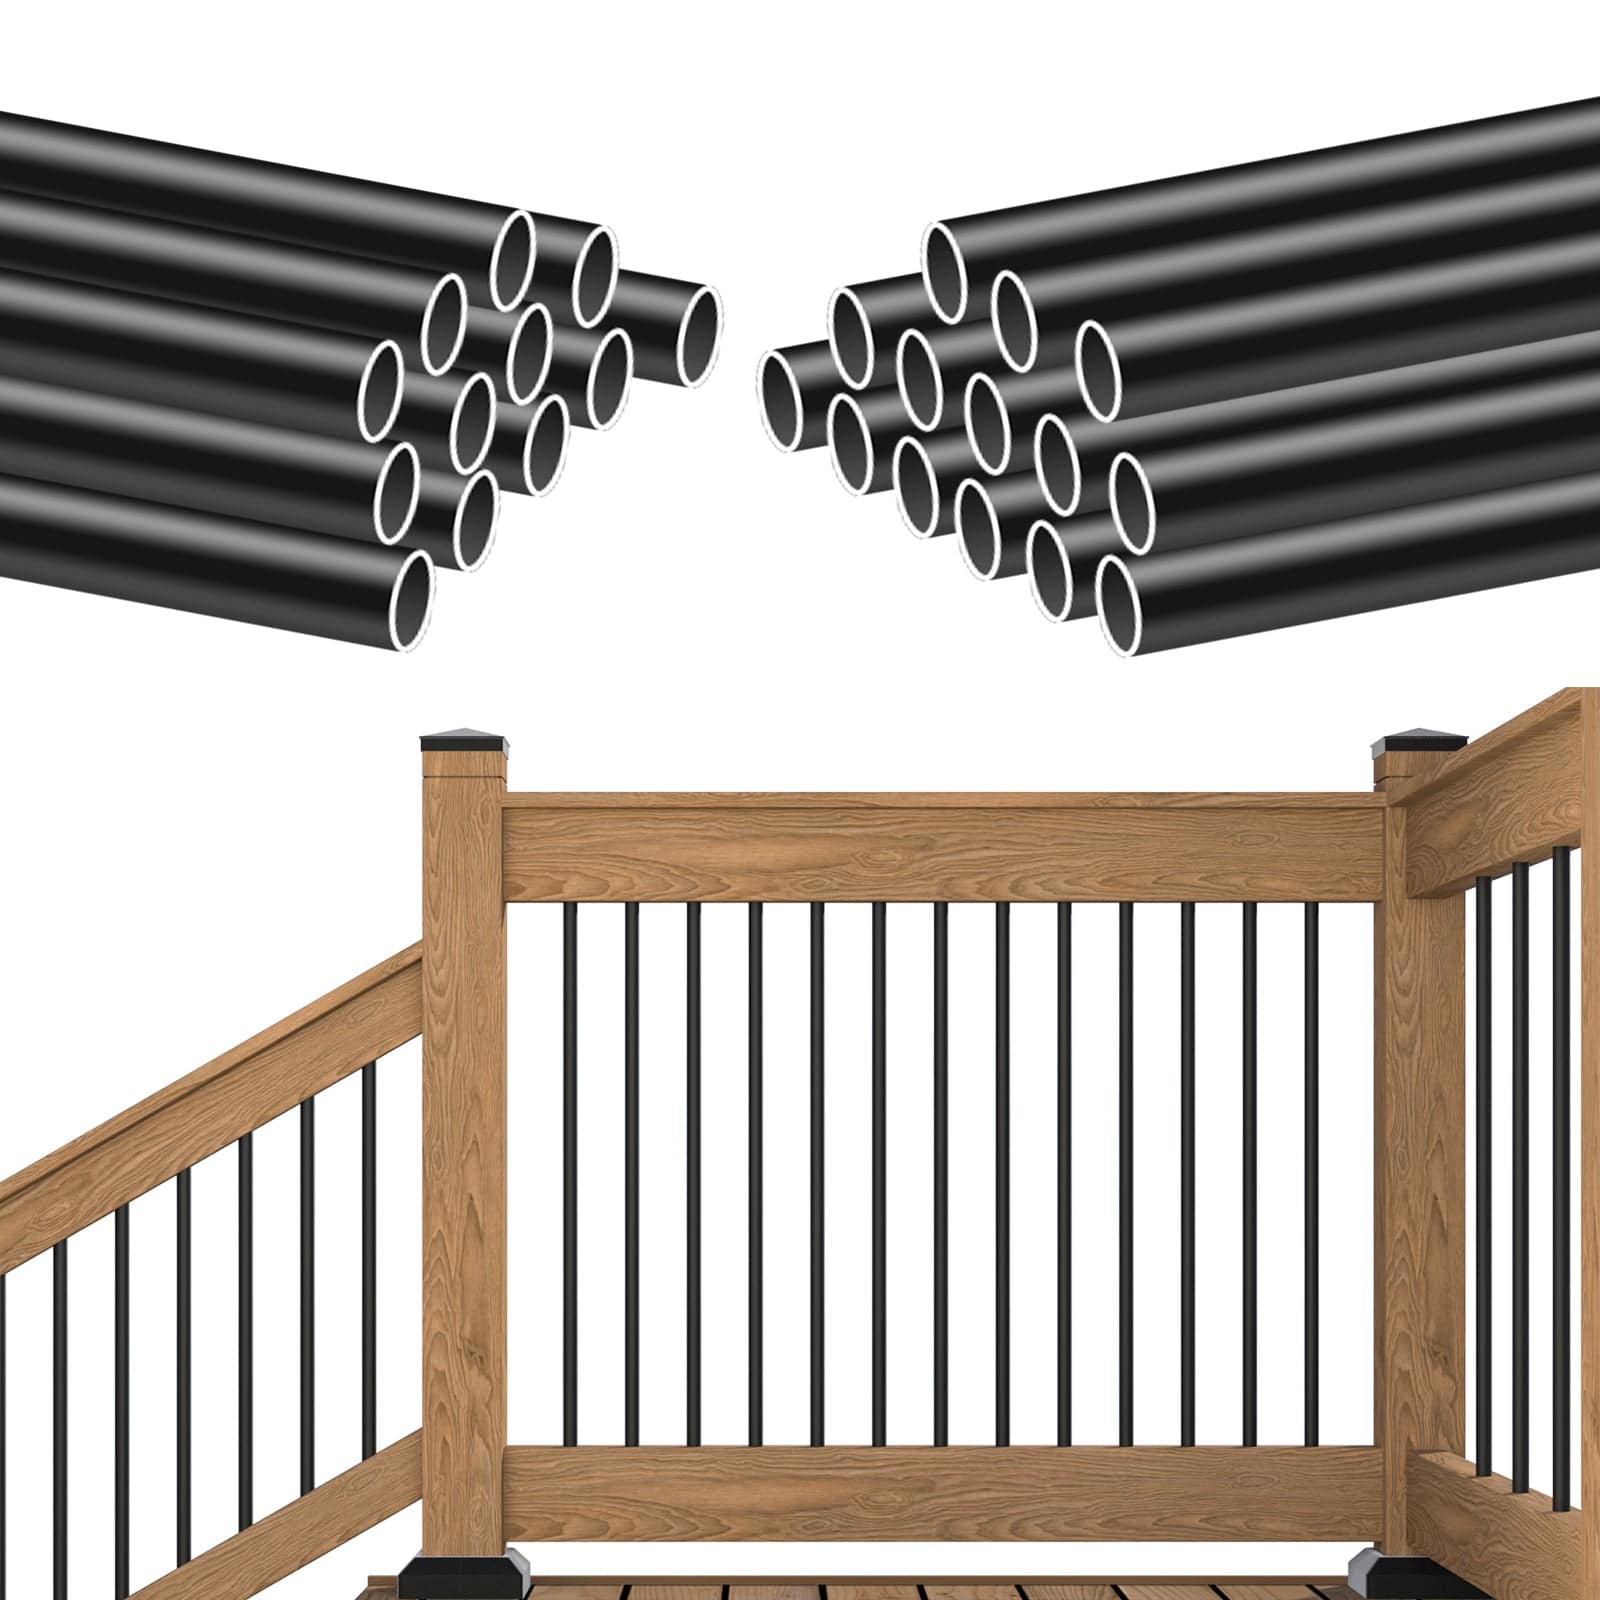 Muzata 25Pack 36 inch Aluminum Deck Balusters Round Black Deck Railing Stair Porch Staircase Spindles 3/4 inch Diameter Hollow for Wood and Composite